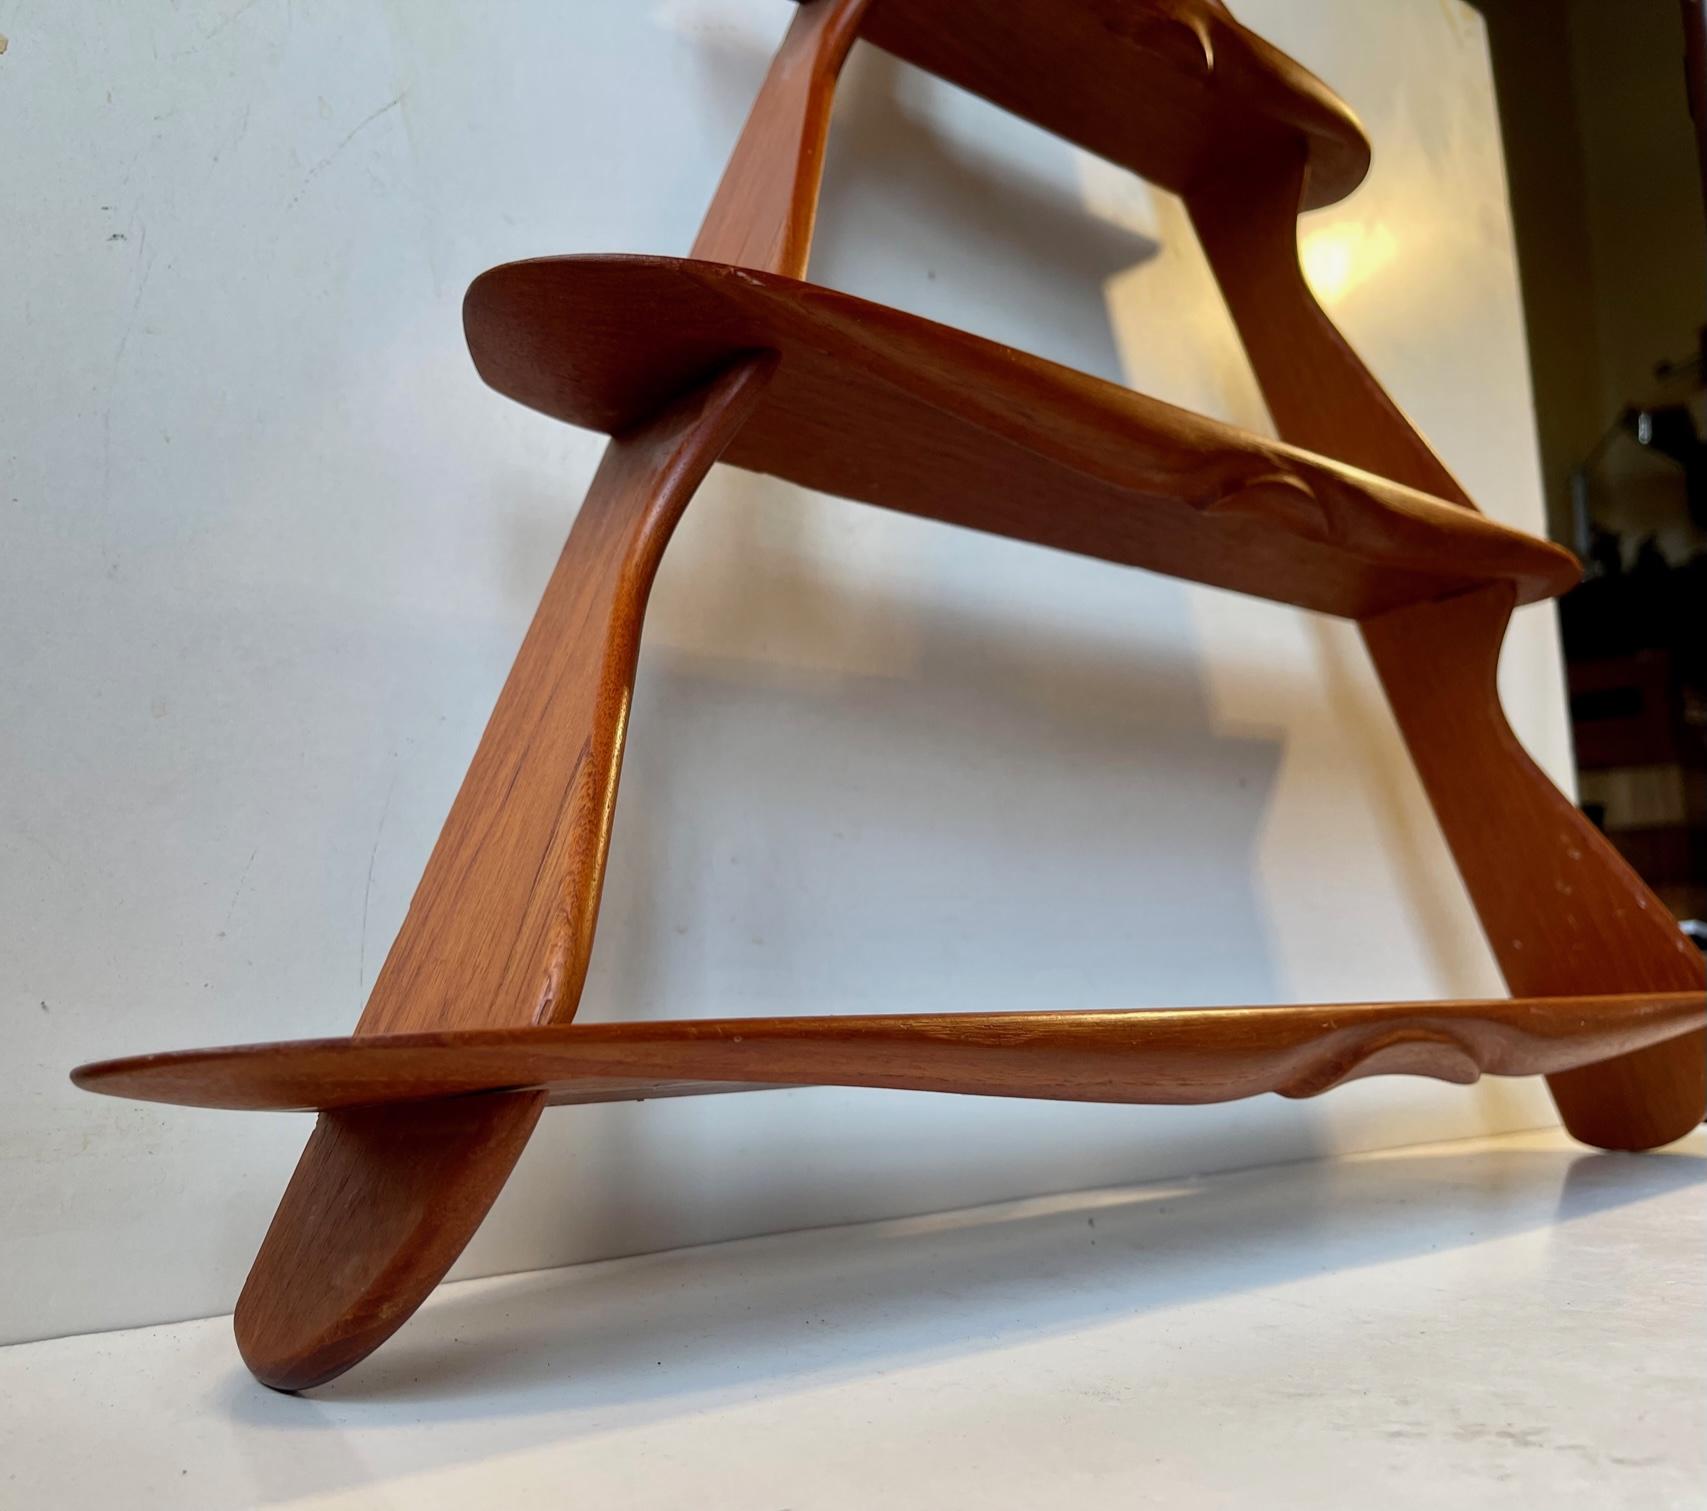 Small triangular wall shelf in solid teak. Assembled without the use of metal. It can be disassembled and assembled again within minutes. It features beautiful organically shaped and hand-finished profiles. This design is attributed to the most